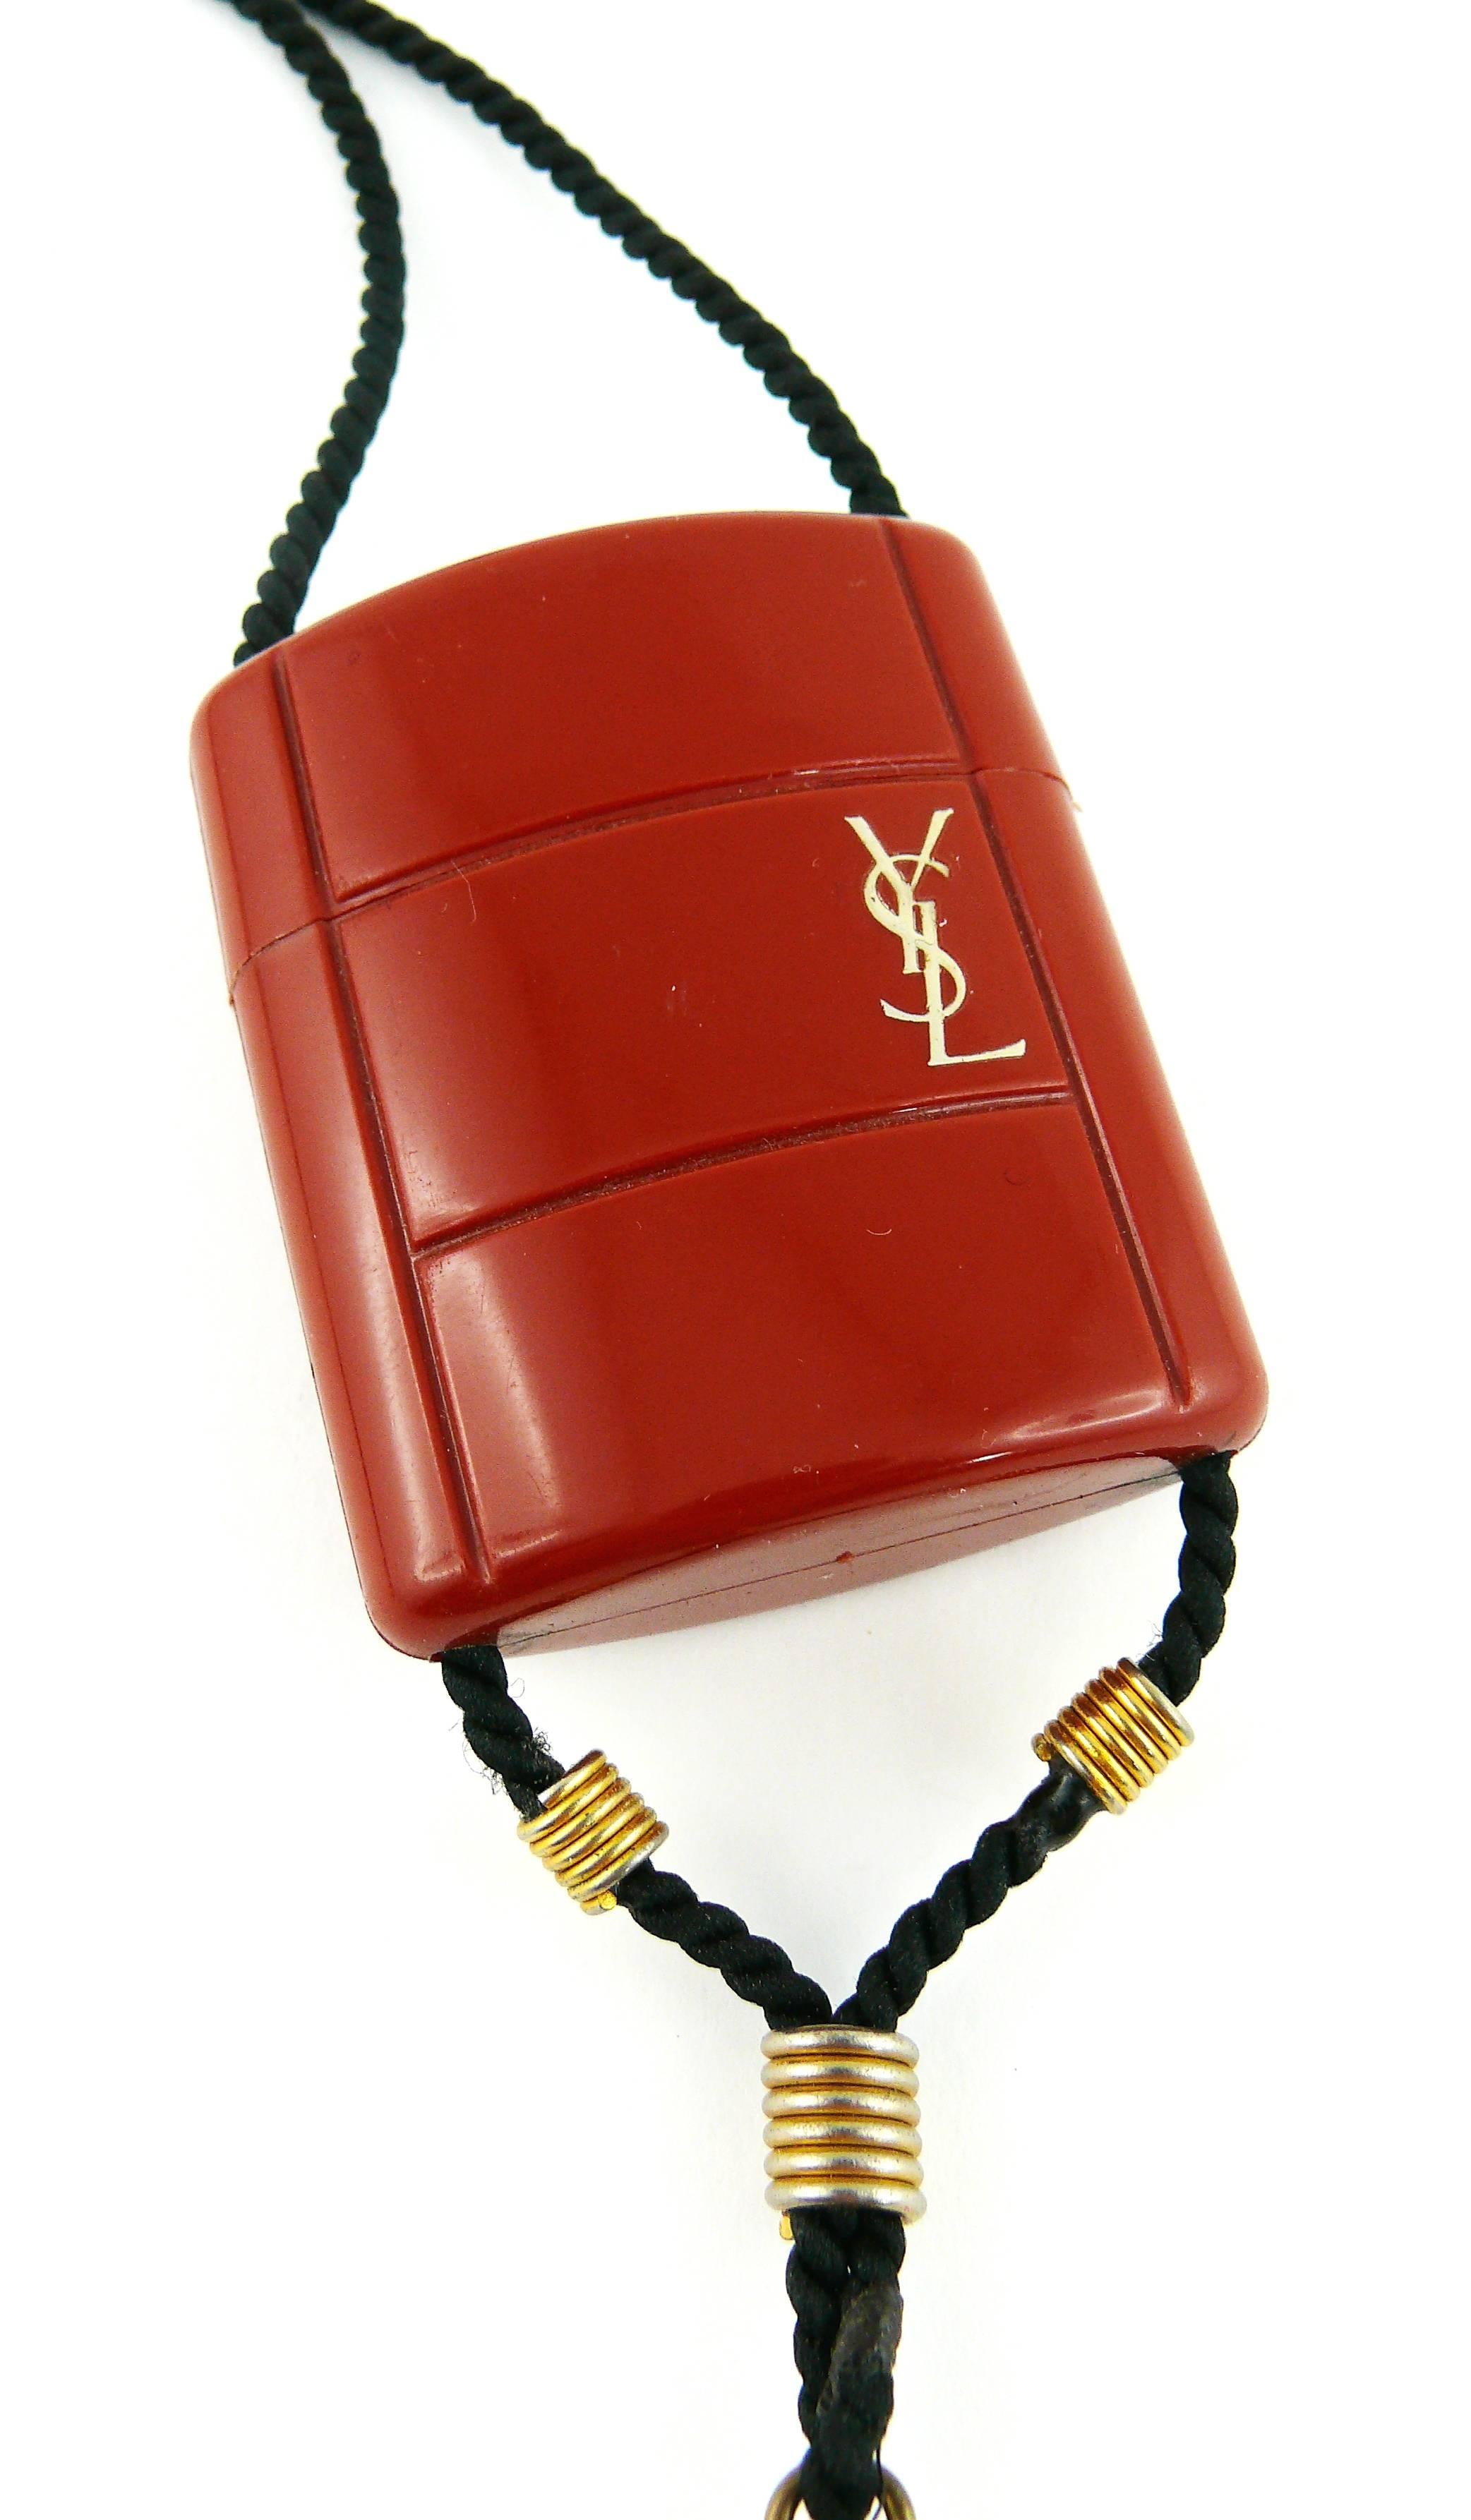 YVES SAINT LAURENT vintage Opium inro style pendant necklace.

This necklace consists of a black cord, a burnt orange plastic container, a silk tassel adorned with black and gold tone beads.

Plastic container opens to insert a miniature